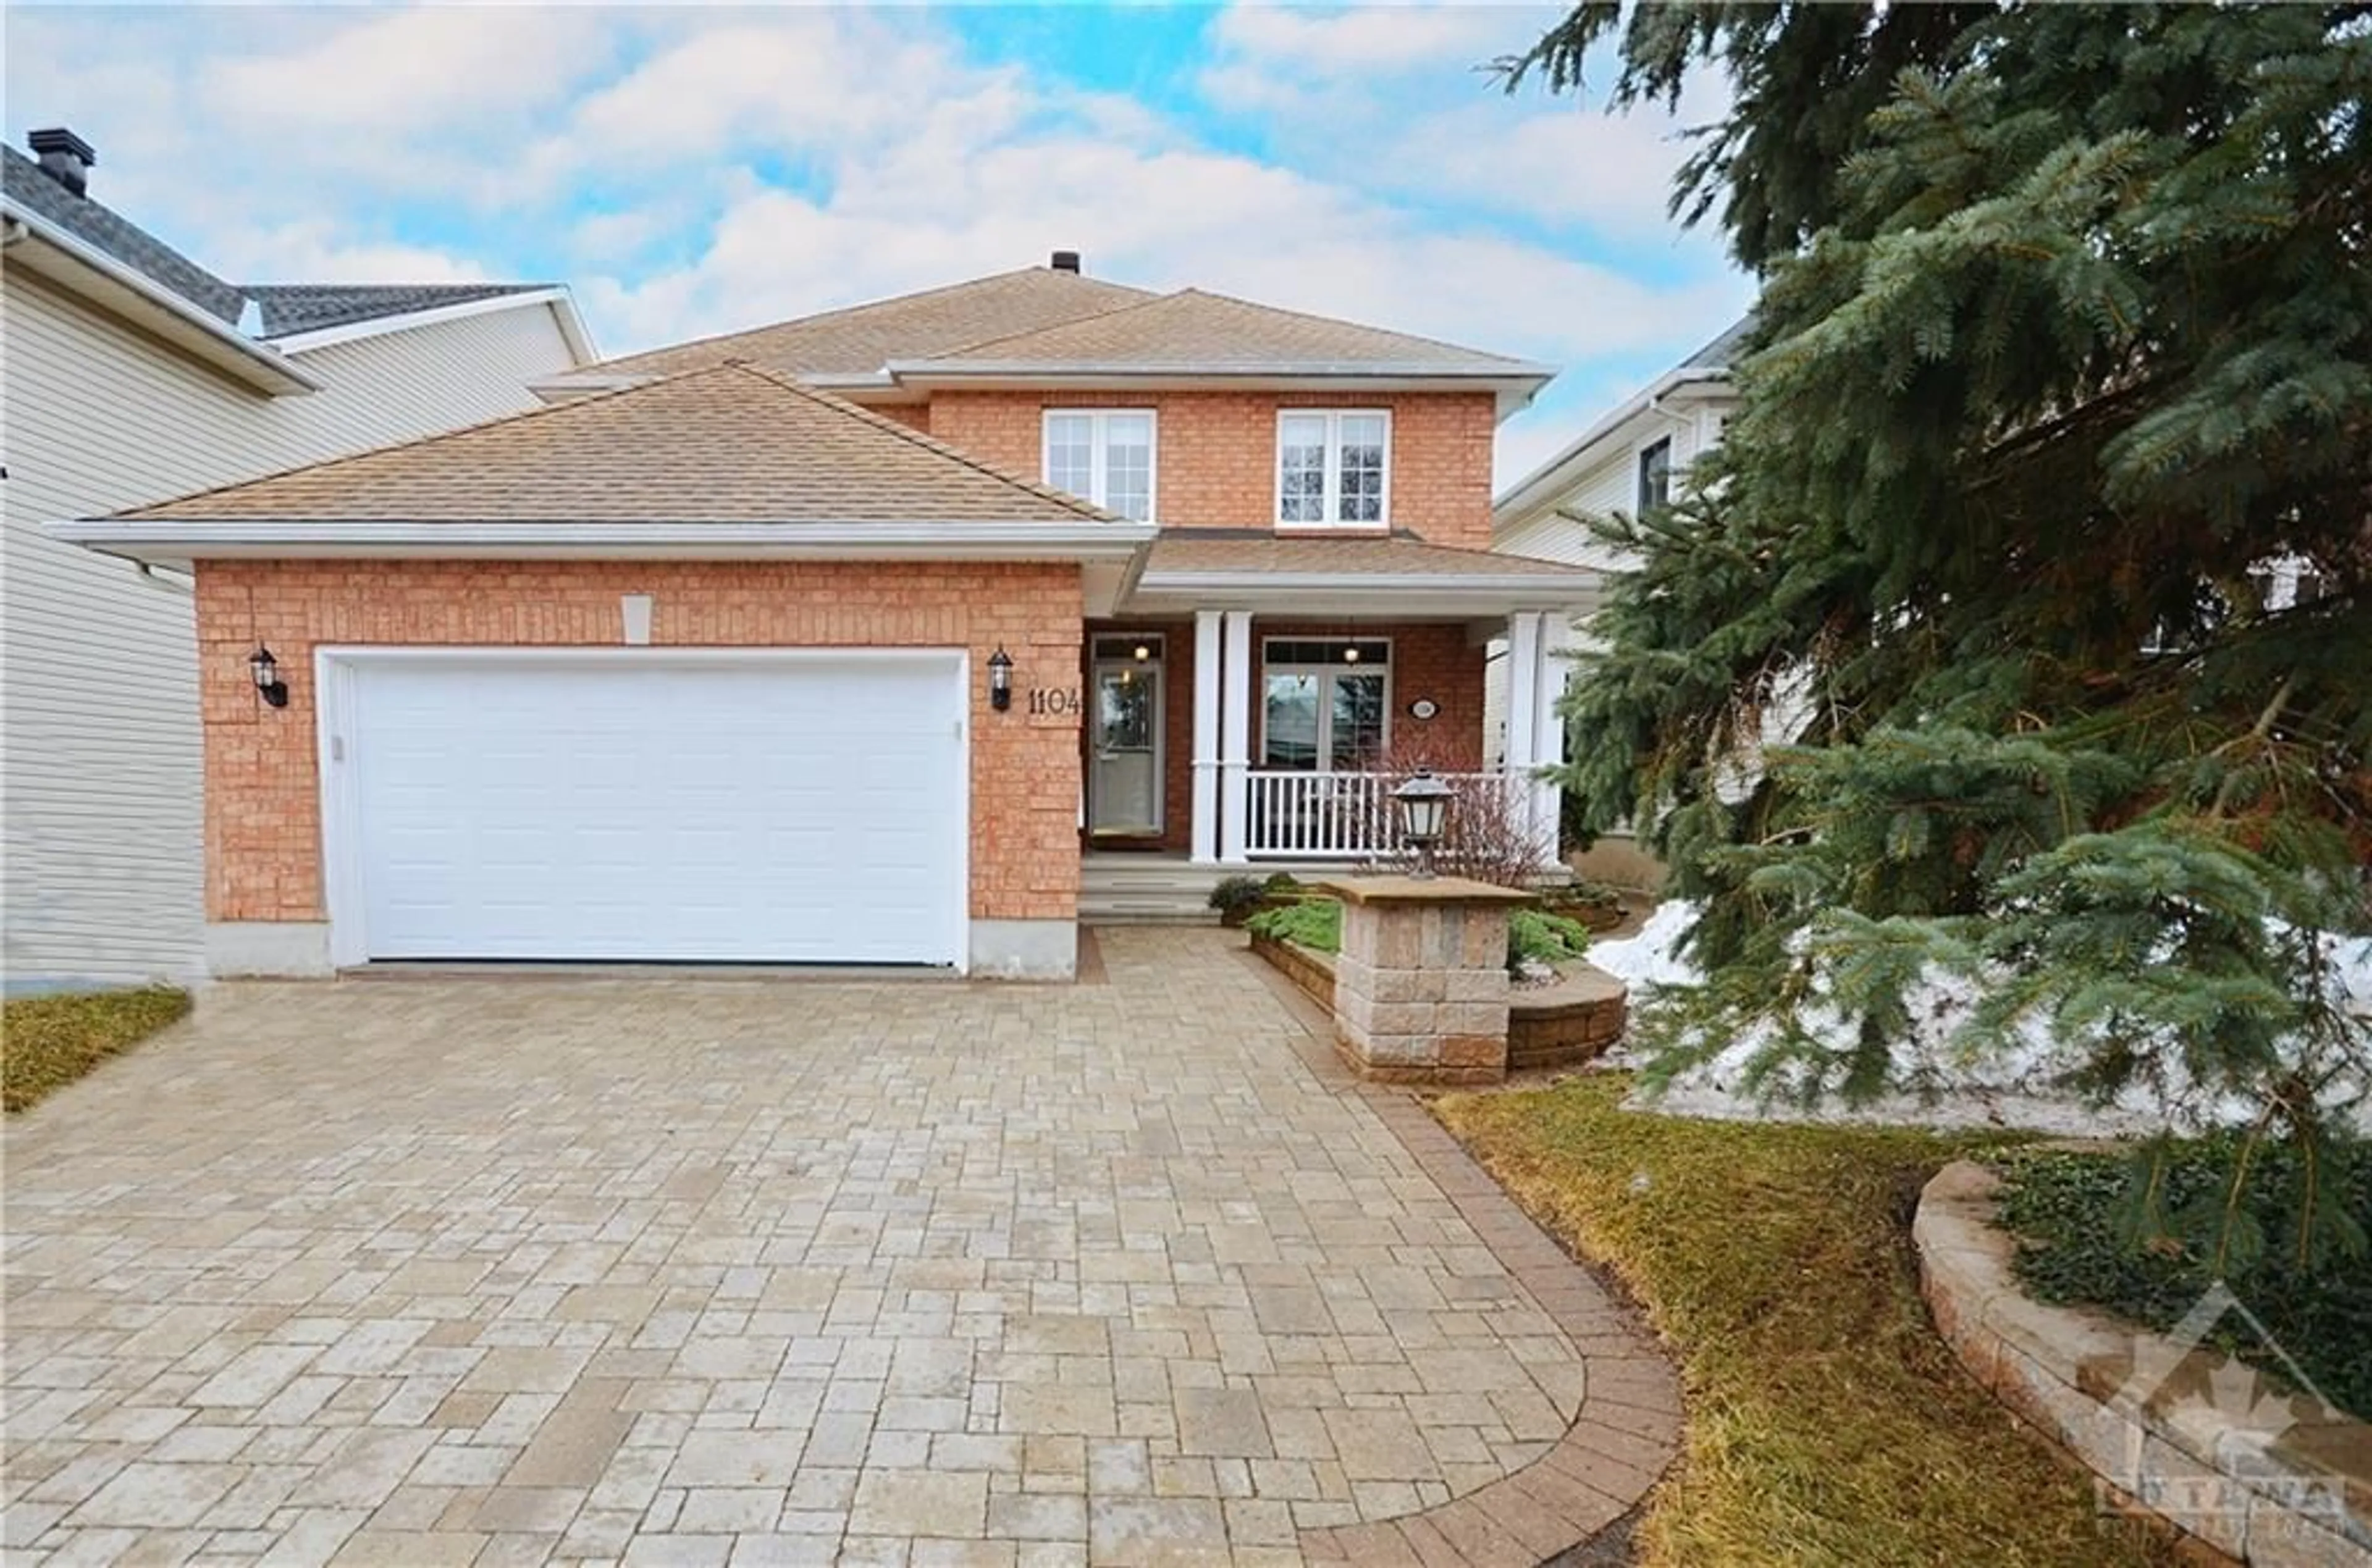 Home with brick exterior material for 1104 CHAREST Way, Ottawa Ontario K4A 4B1